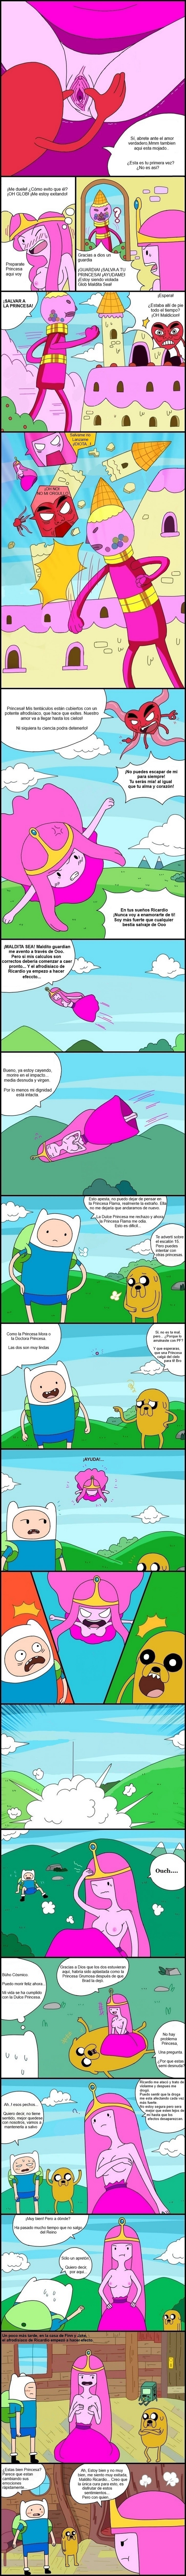 Adult Time 2 – Adventure Time - 5534a08444a06896ab8661cb18ecf023